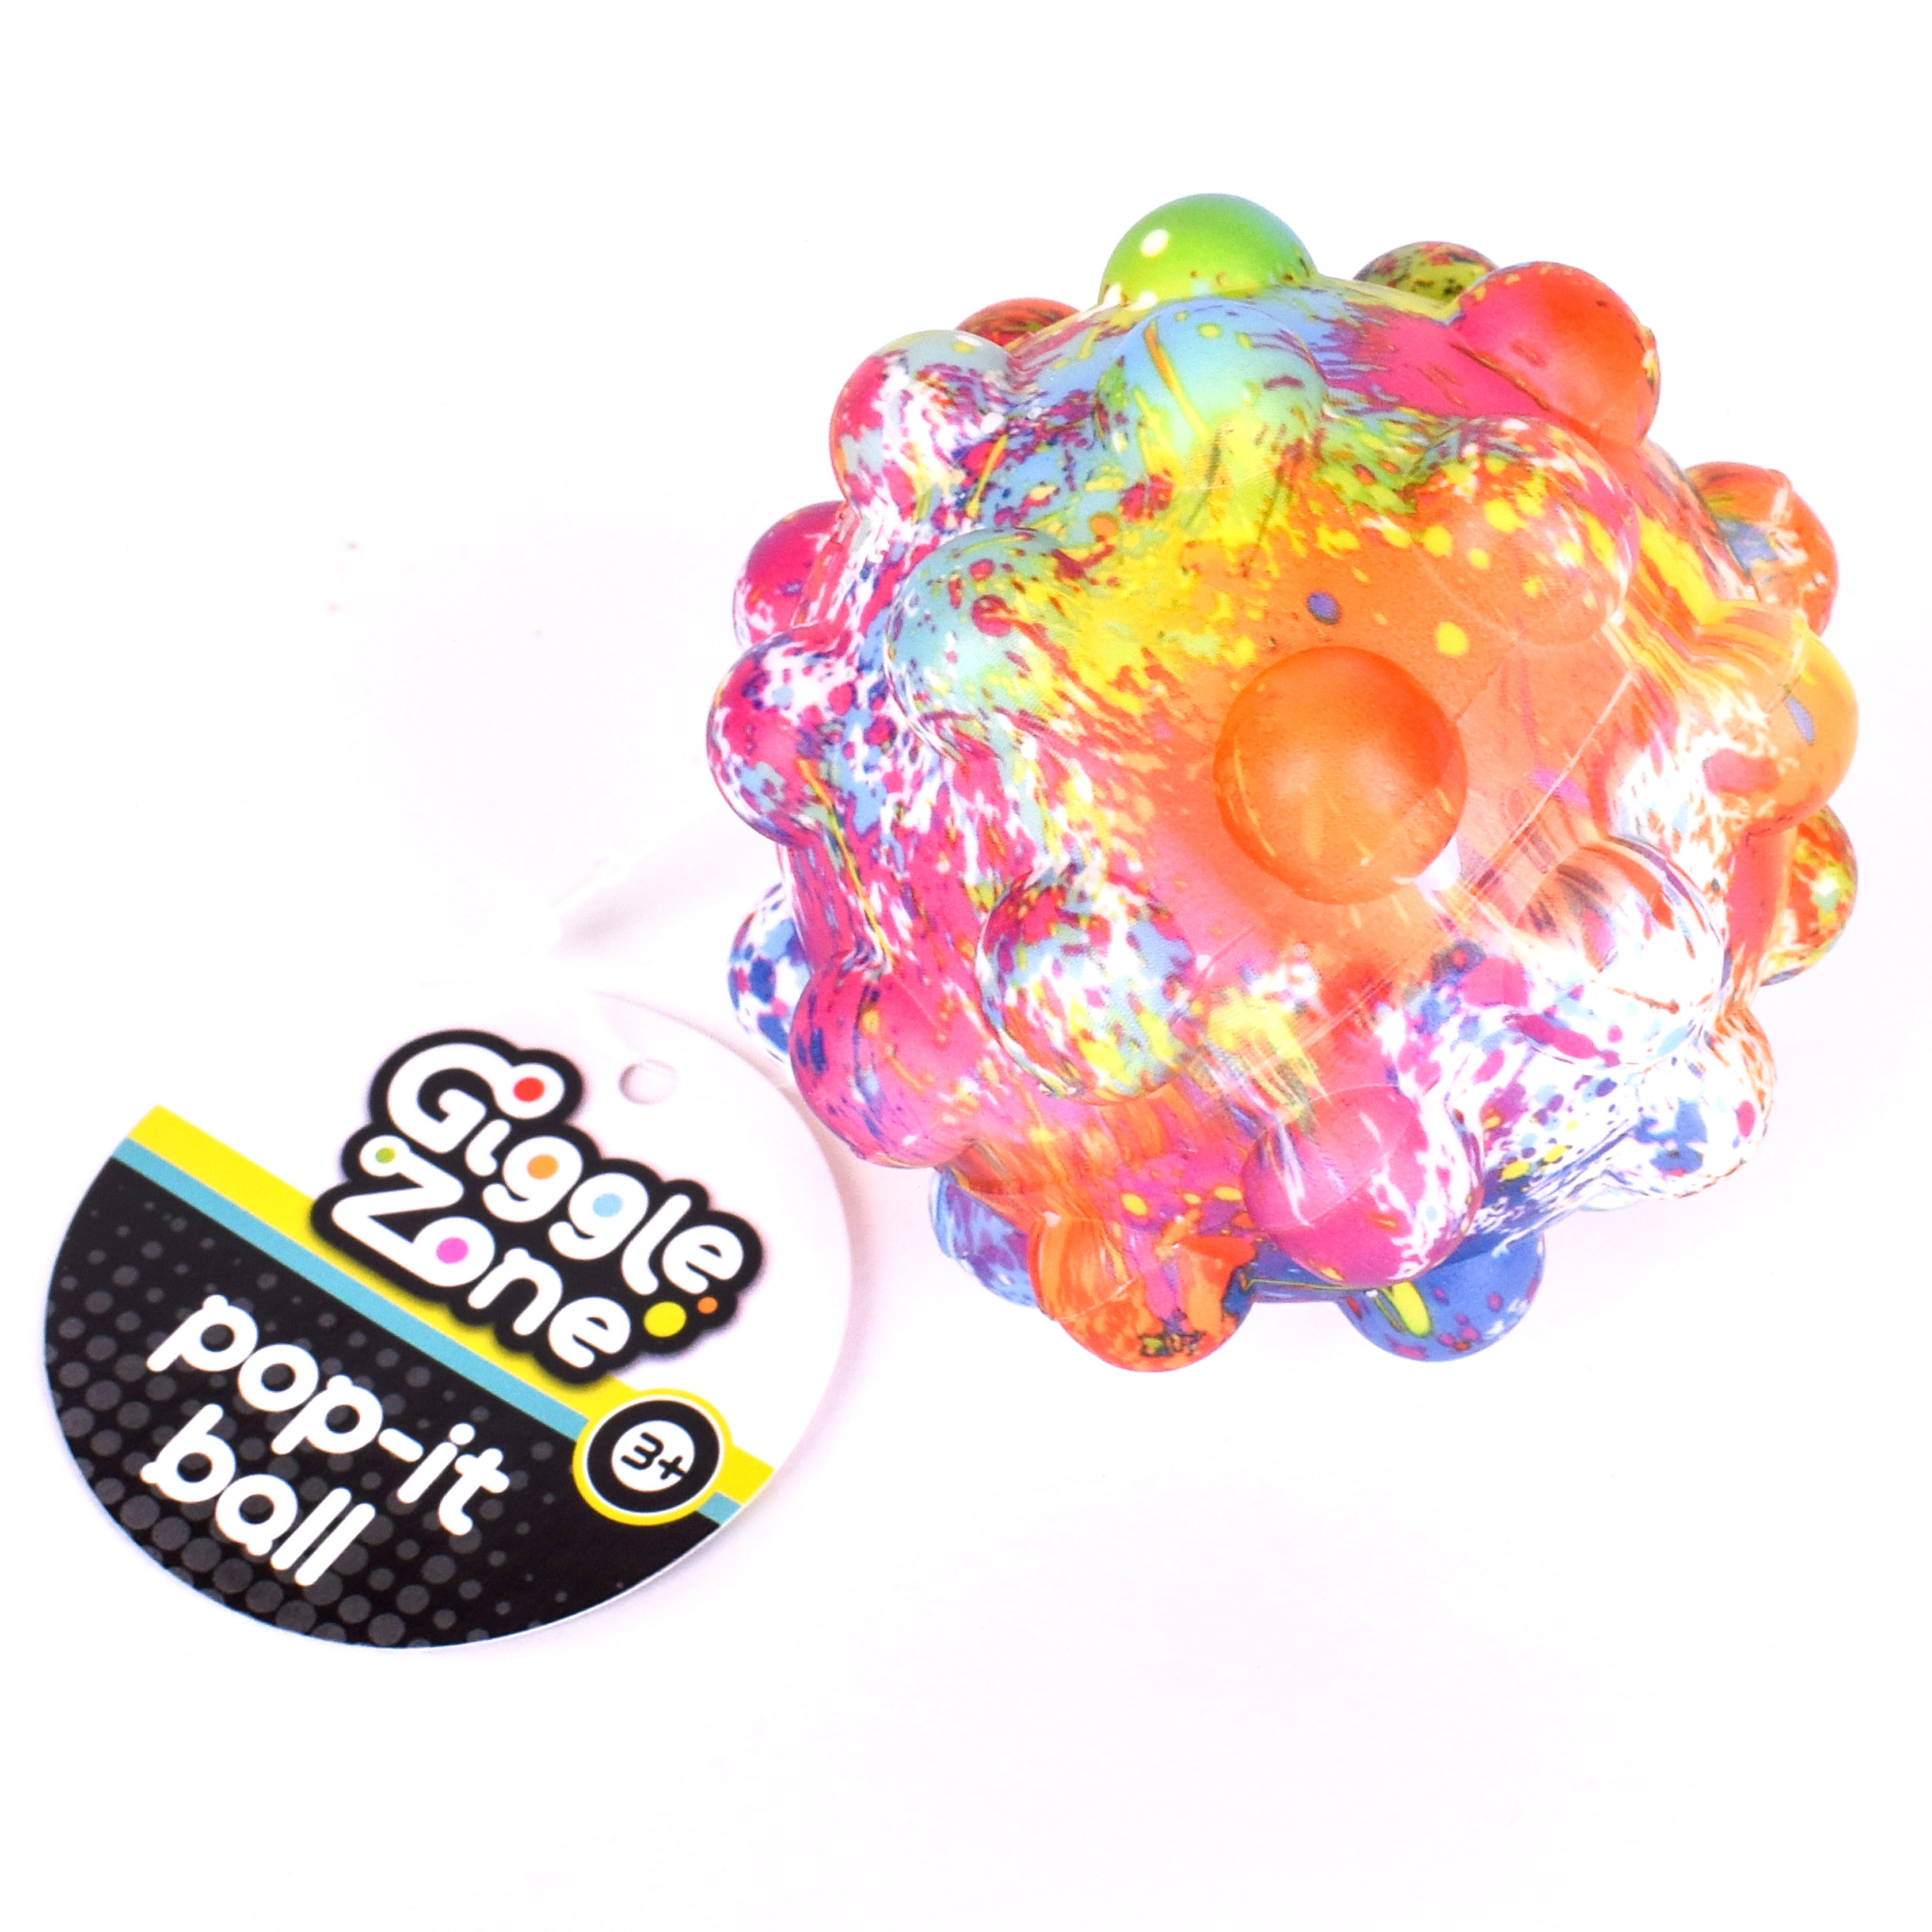 Giggle Zone Pop It Ball – Fidget Sensory Toy - Colors and Styles May Vary | Unisex, Ages 3+ $1.50